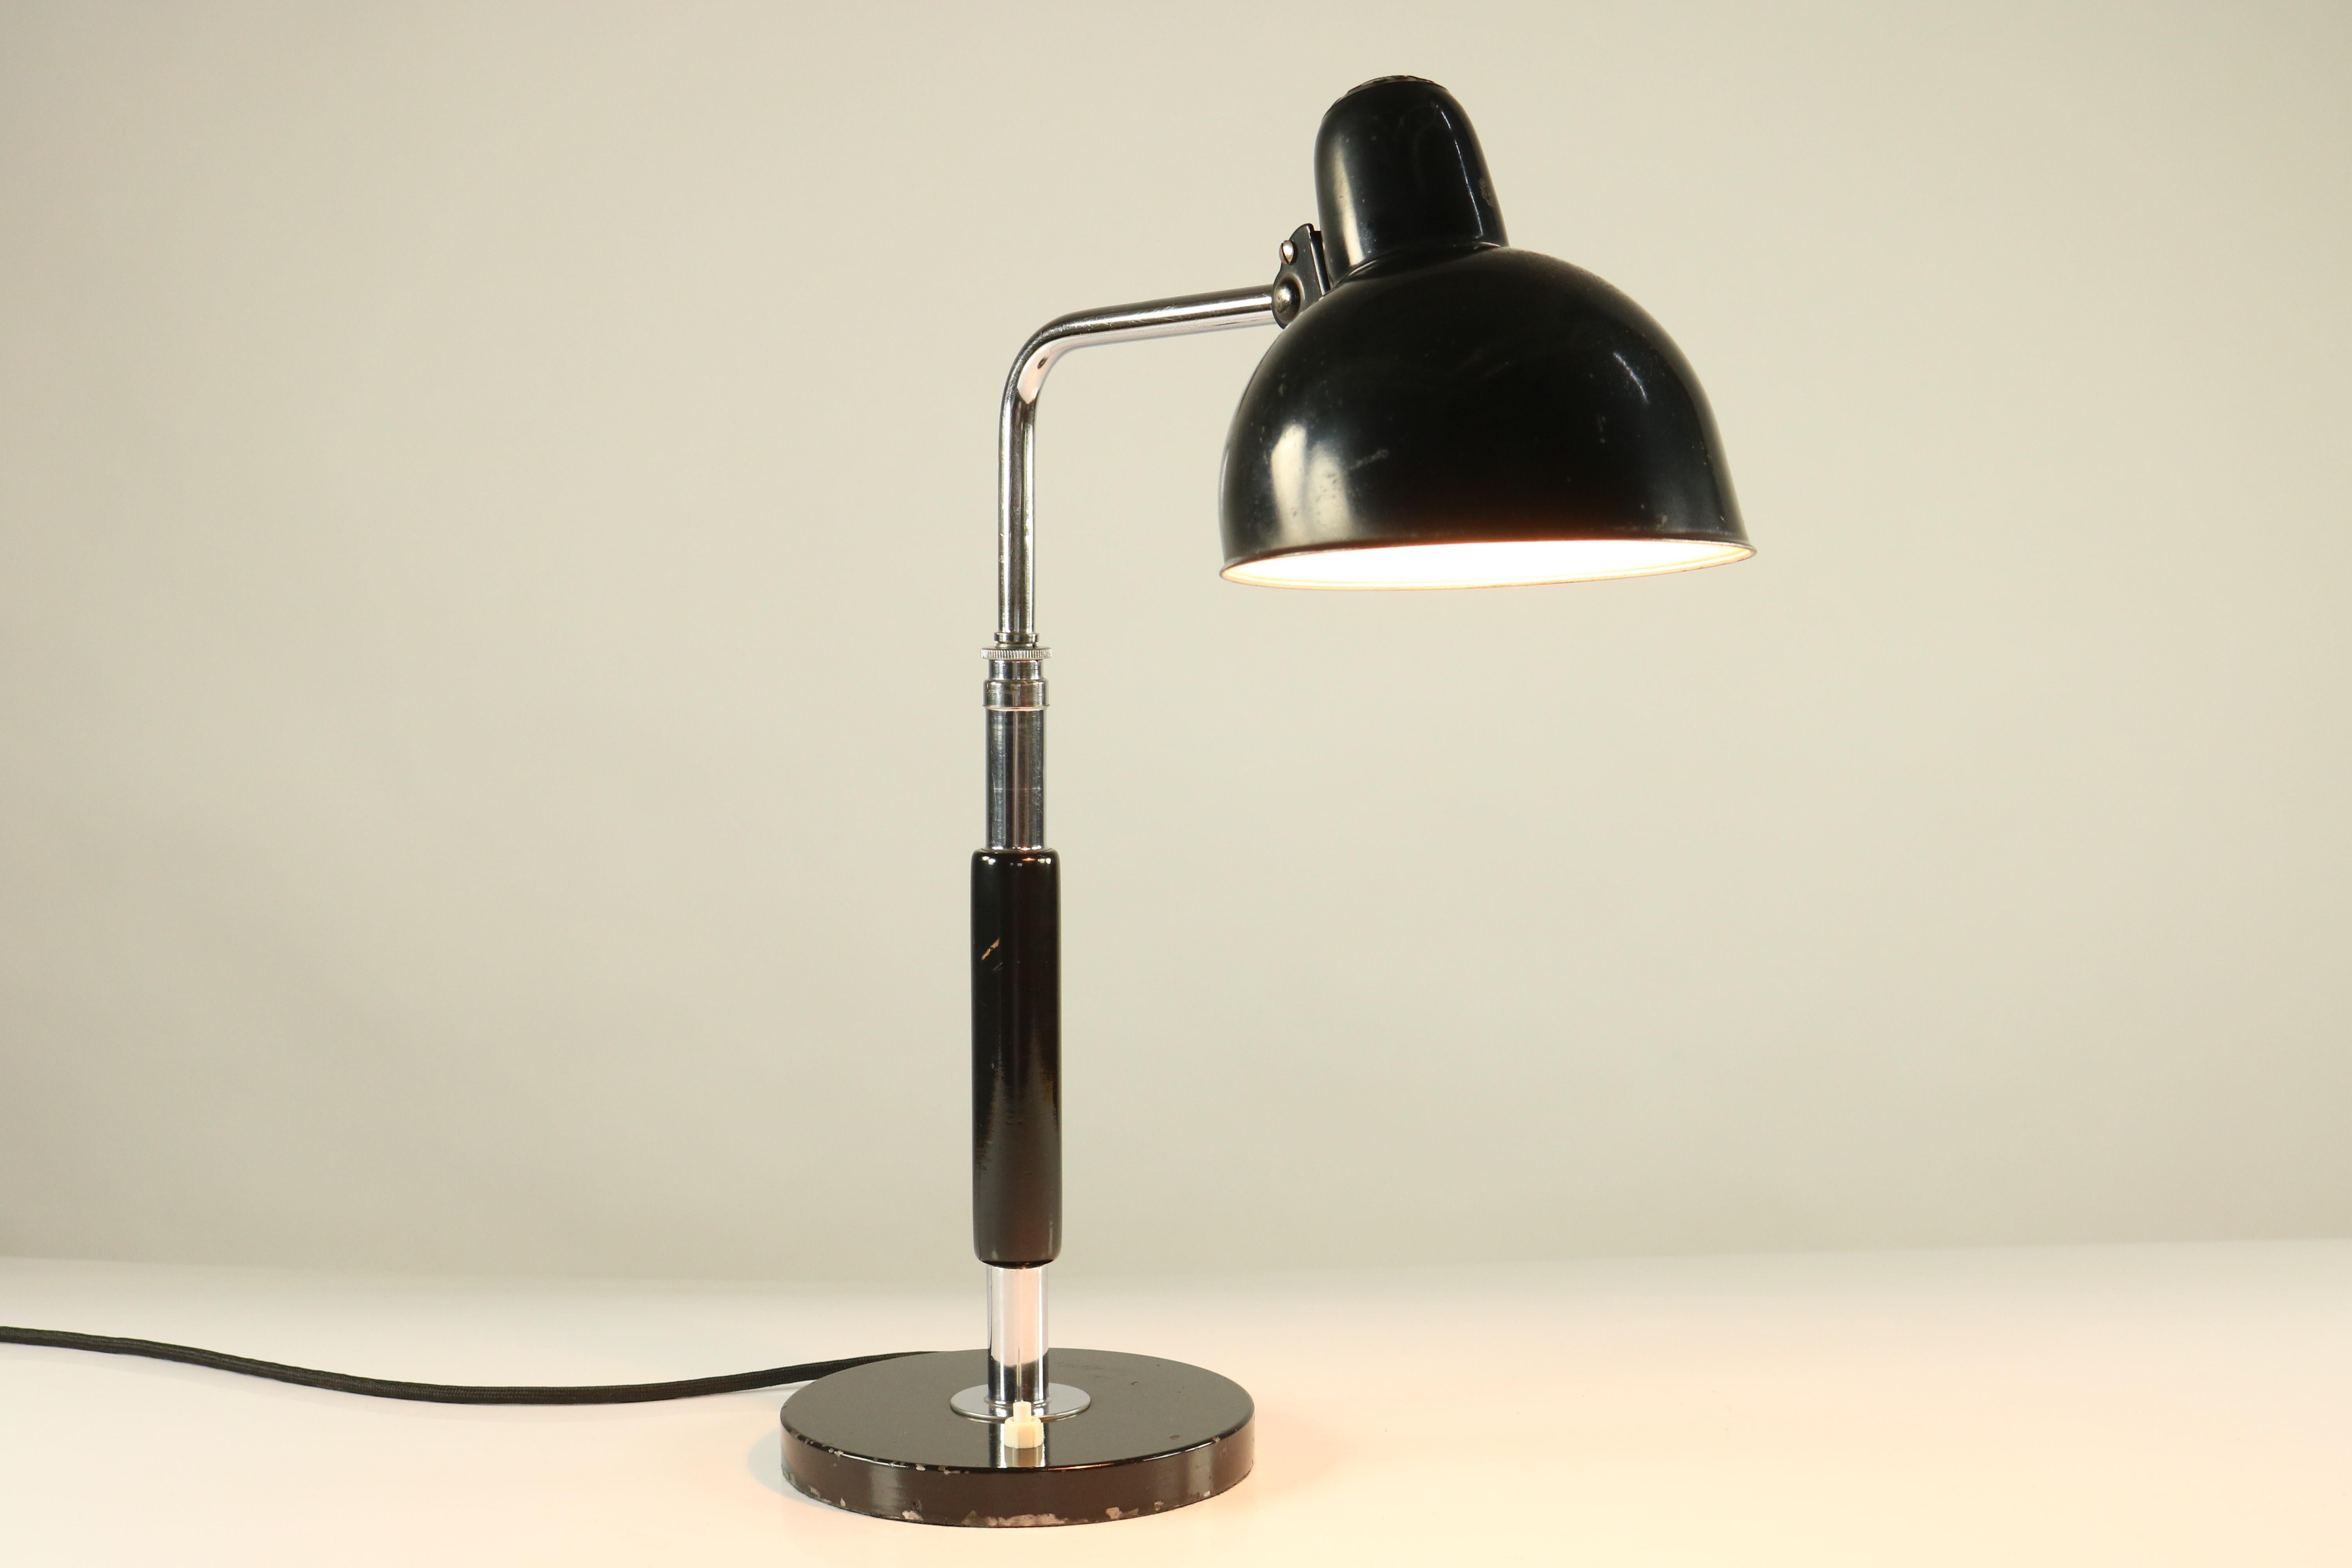 Christian Dell Bauhaus design desk lamp by Kaiser
Early model 6607 with old 